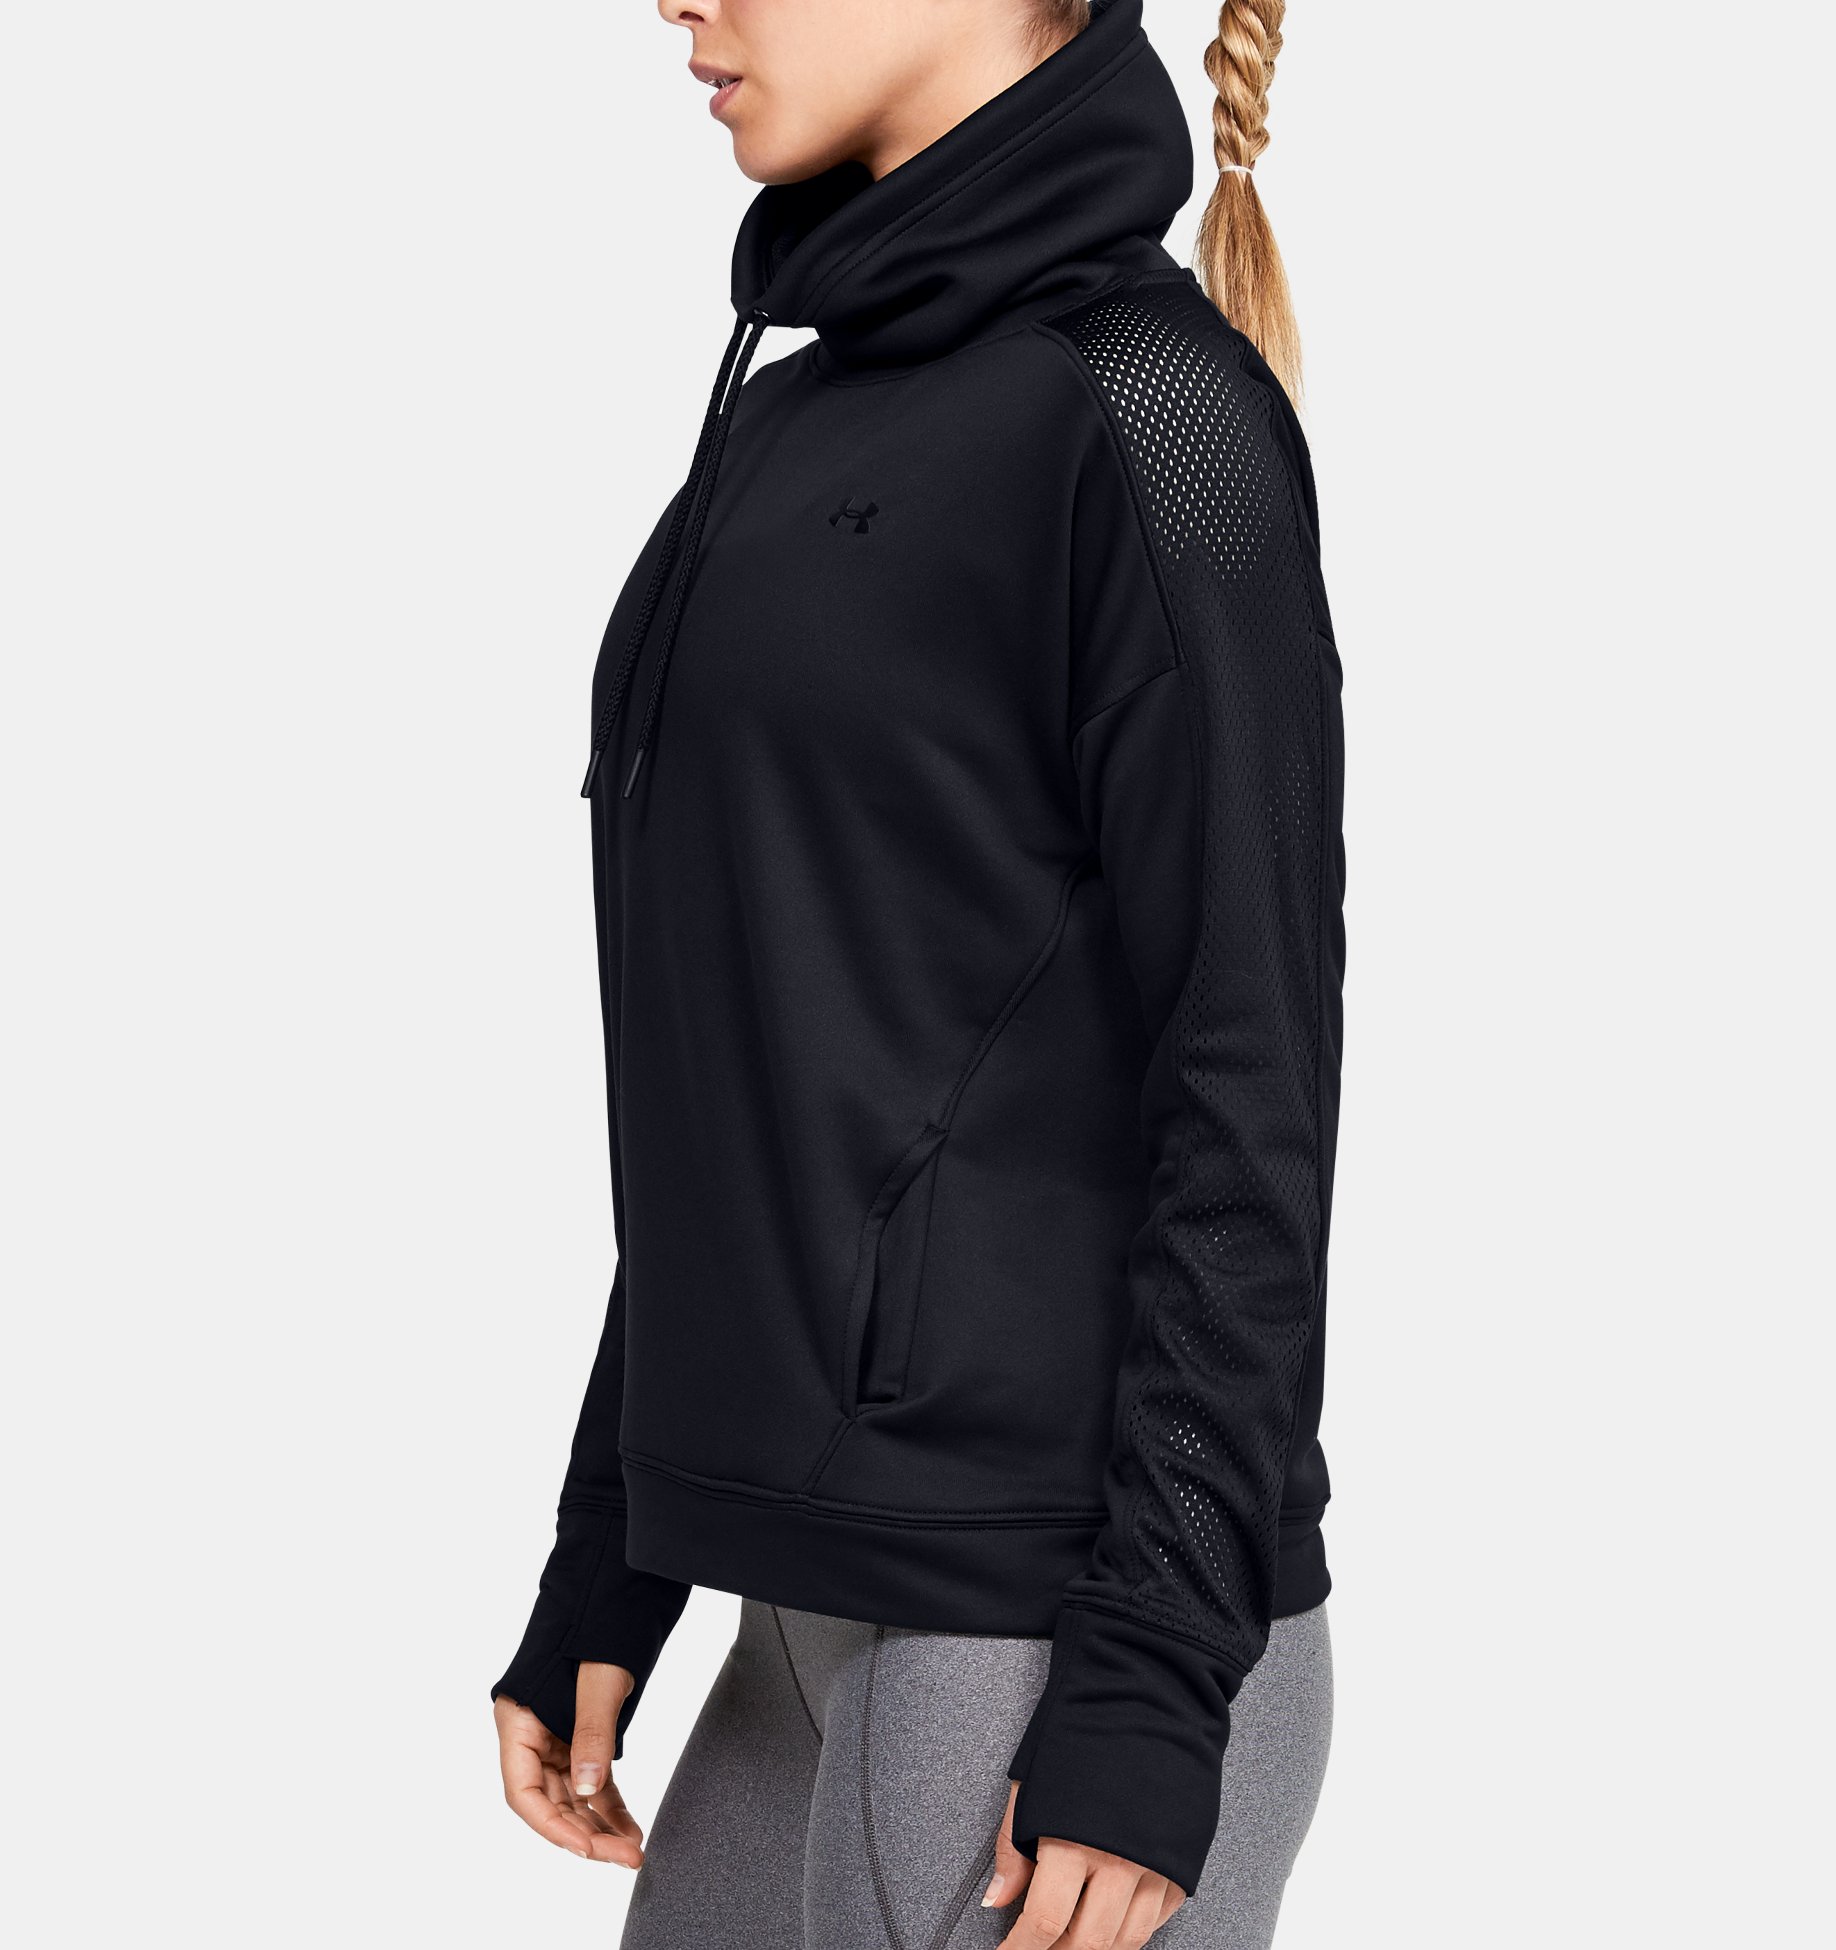 Under Armour Womens Tech Terry Graphic Funnel Neck Sweatshirt